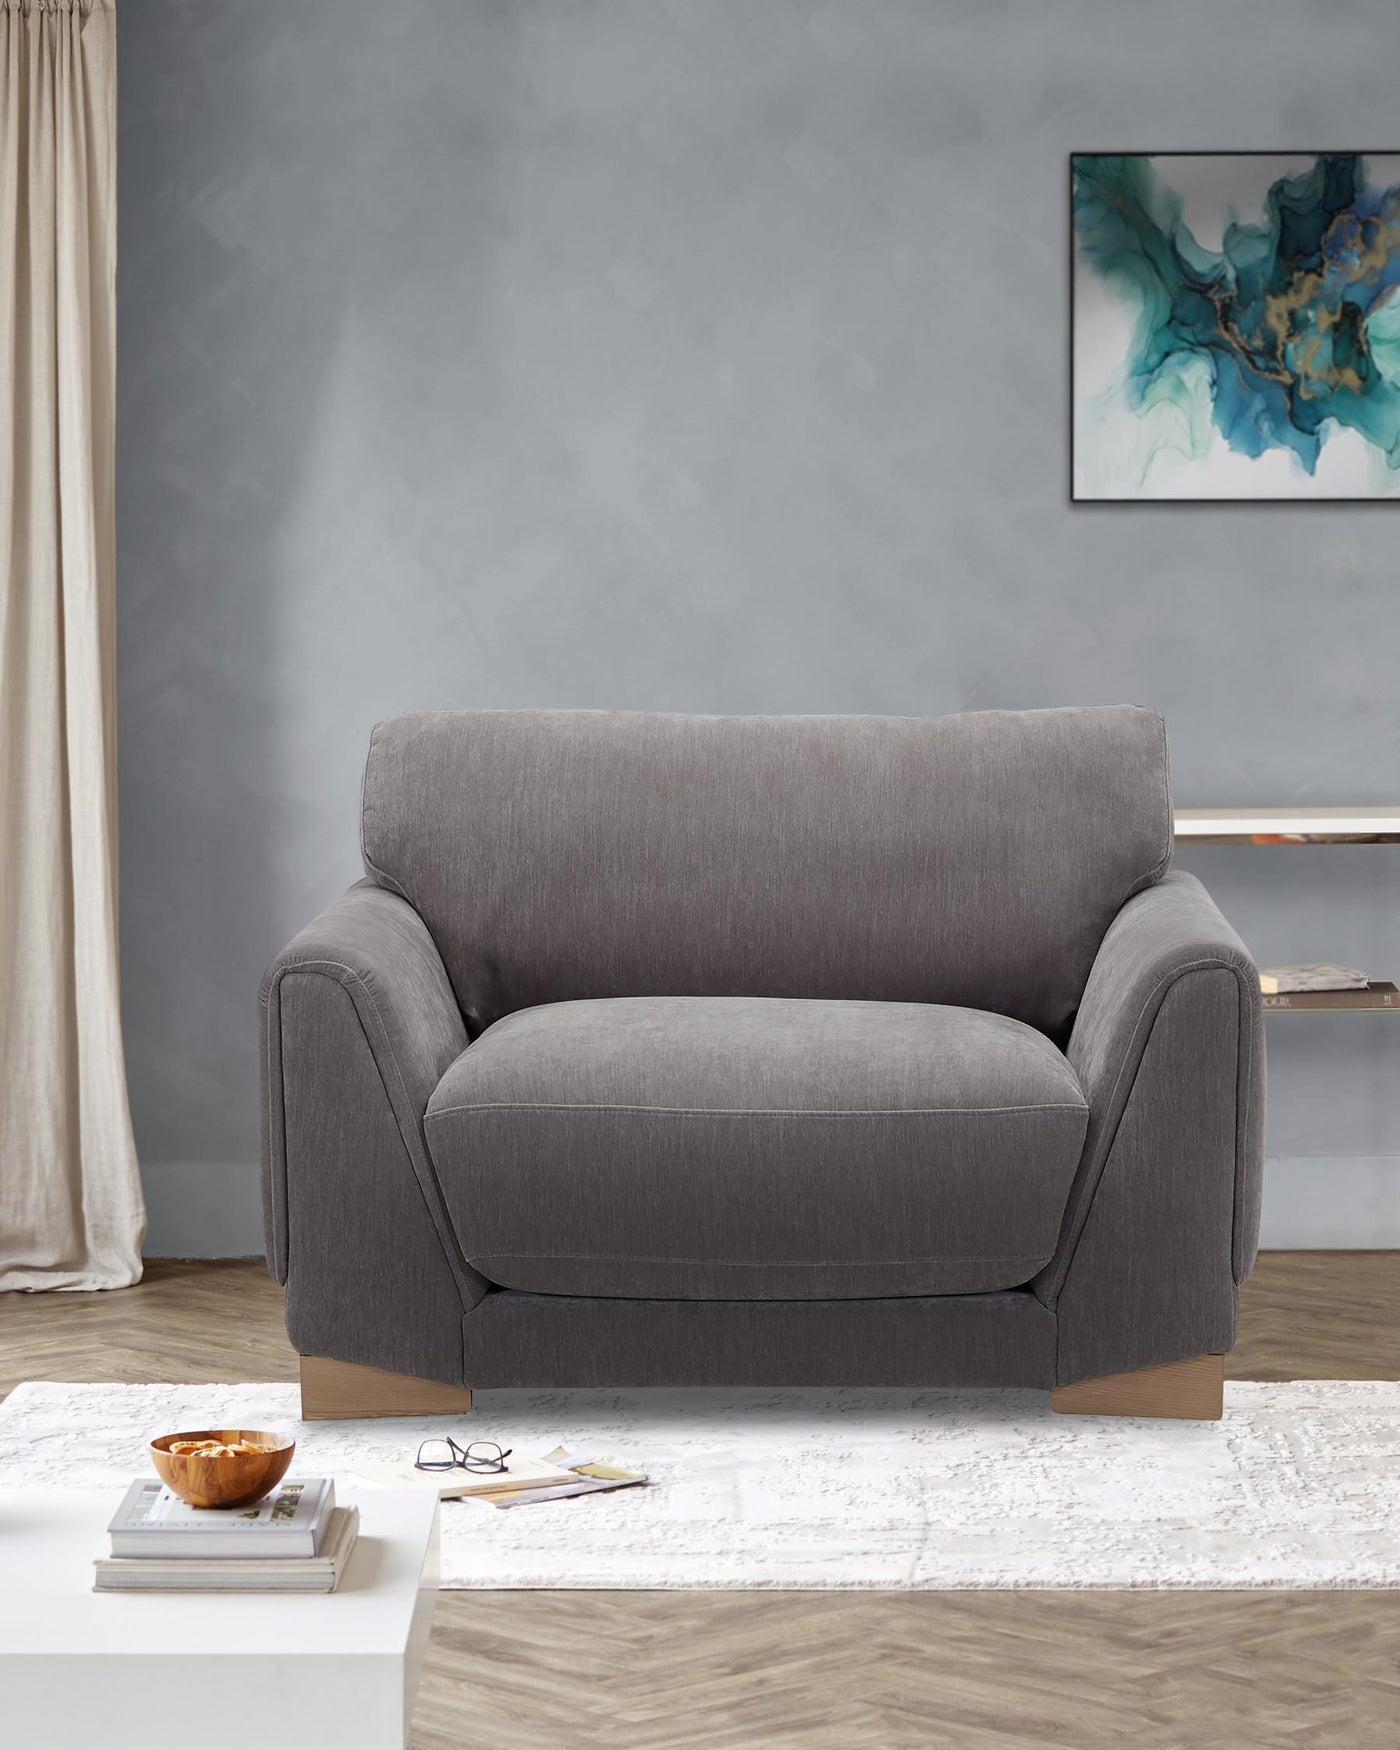 Saige mid grey fabric armchair with natural wood legs